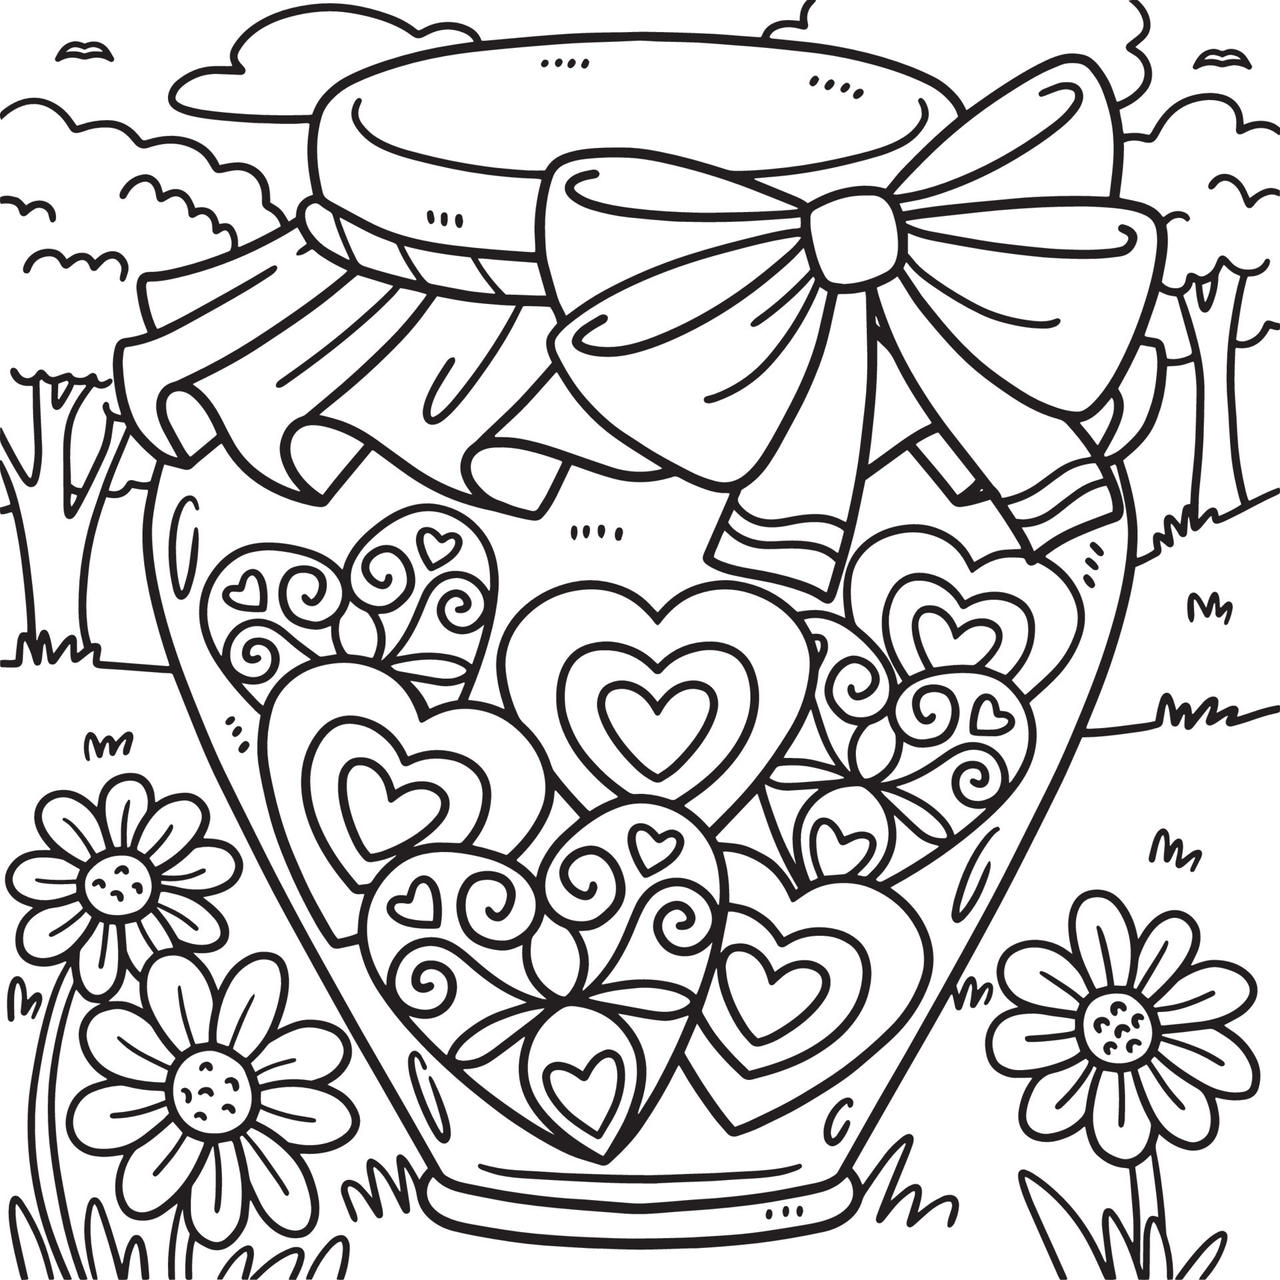 Valentines day coloring pages by coloringpageswk on